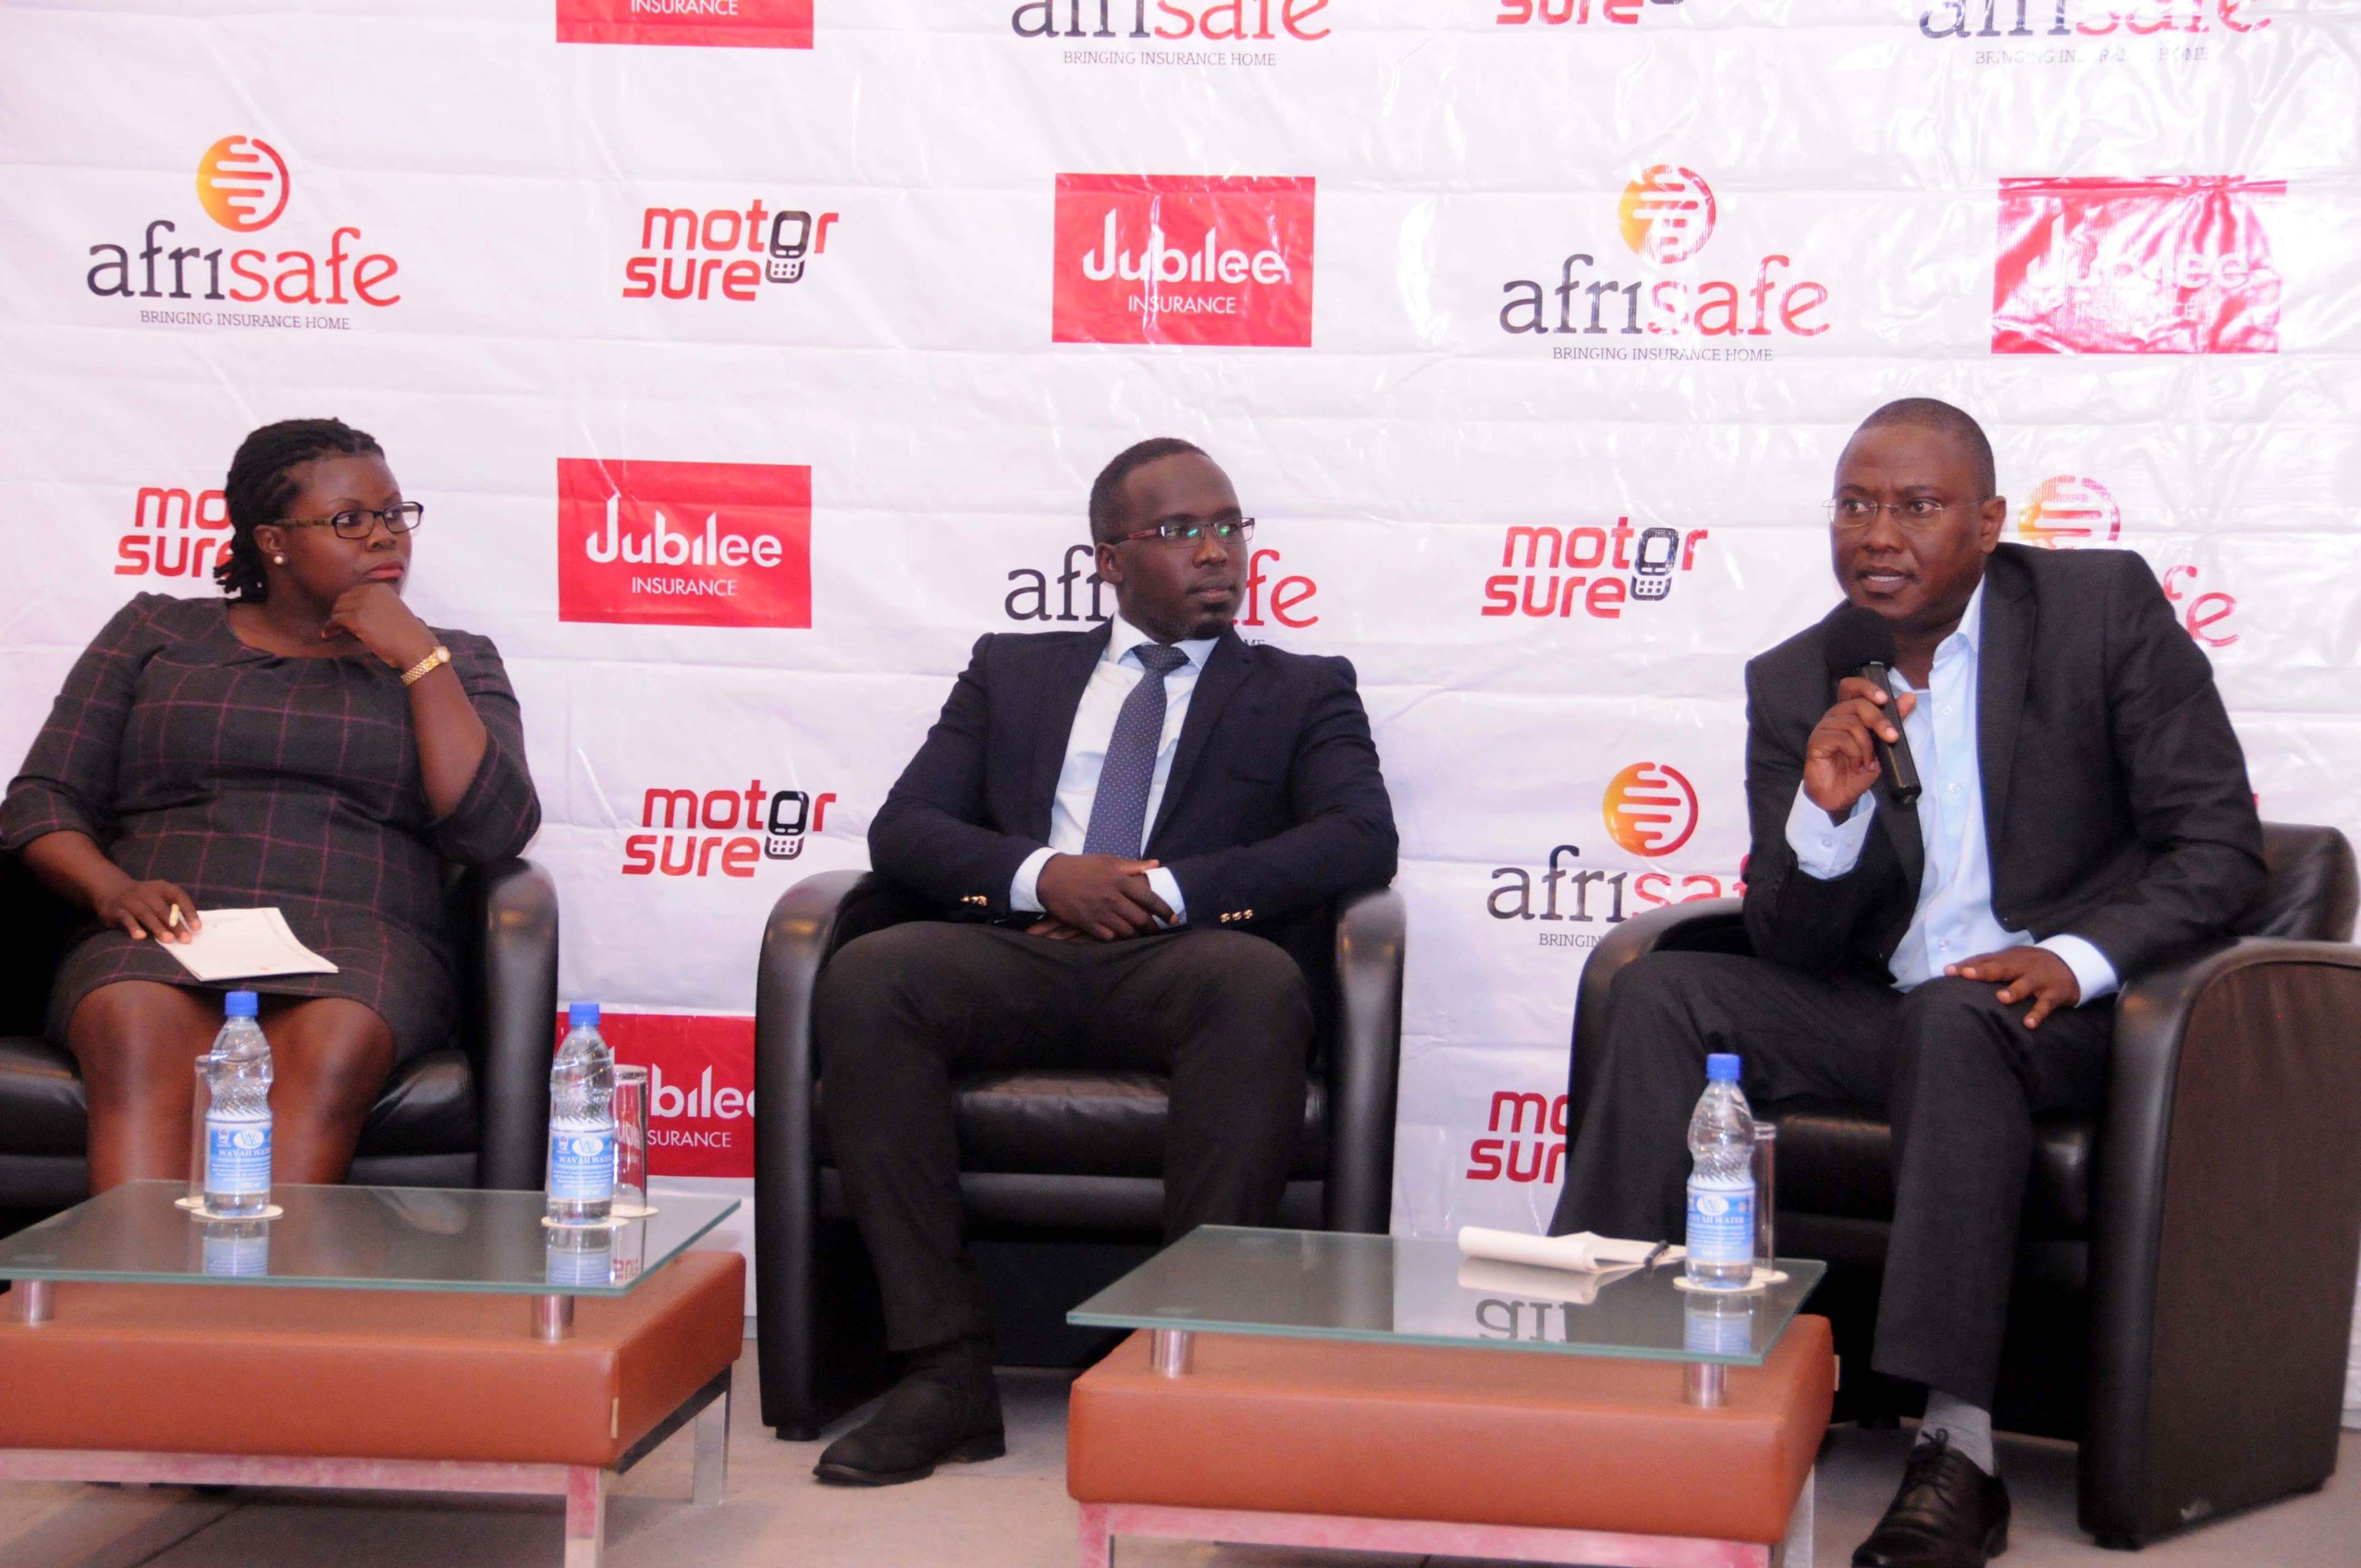 Afrisafe Consultants, Jubilee Insurance Launch Third Party Service on Mobile